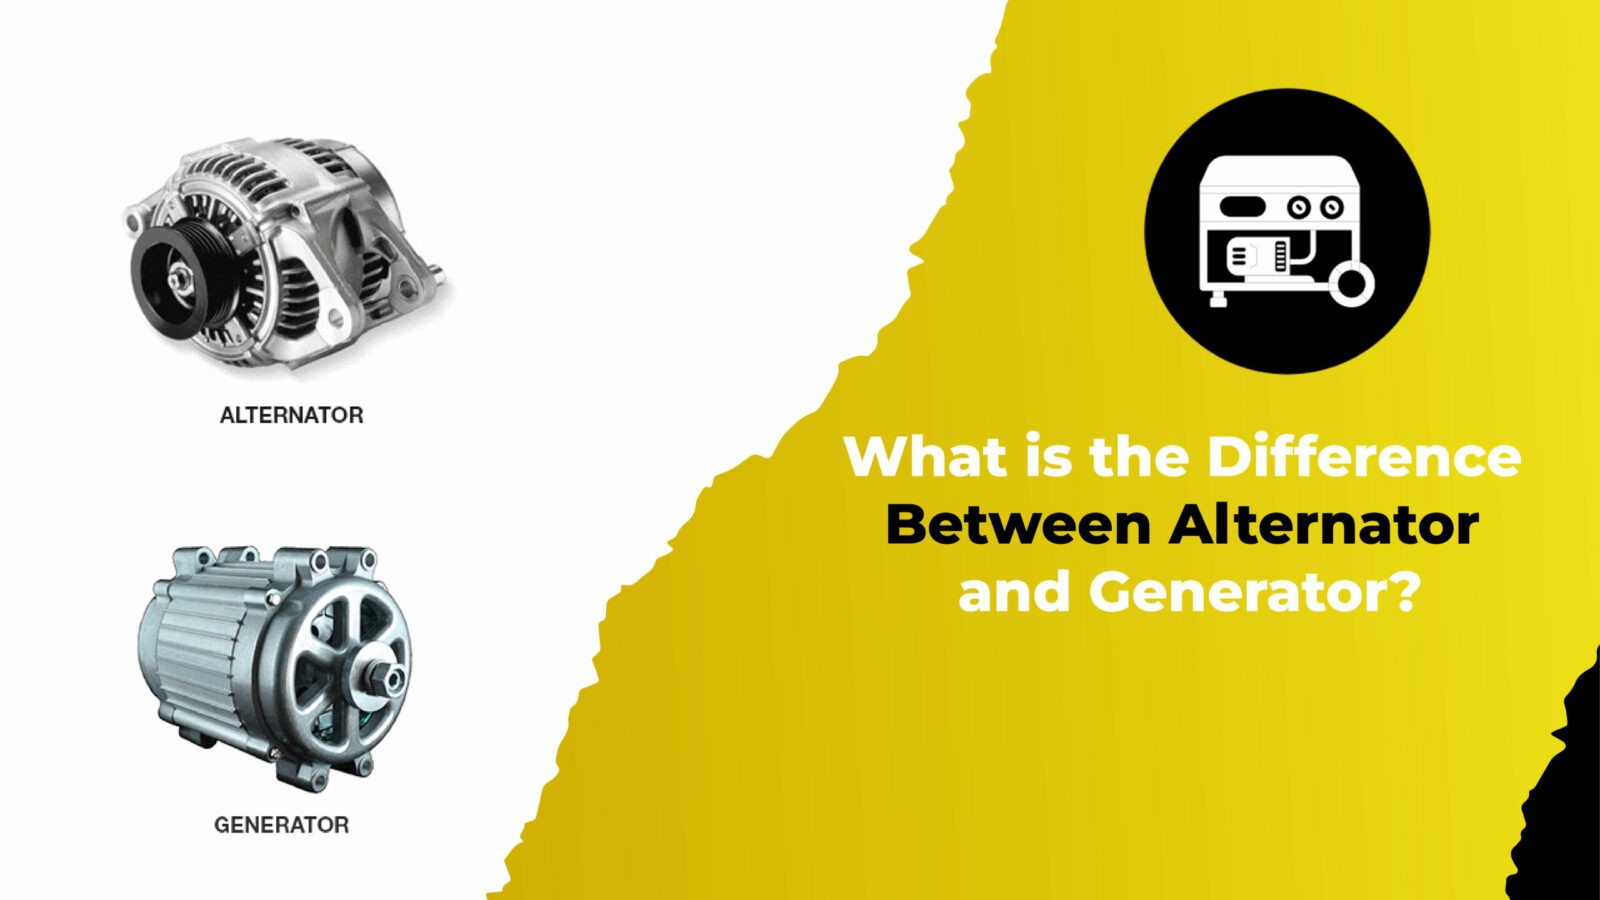 What is the Difference Between Alternator and Generator